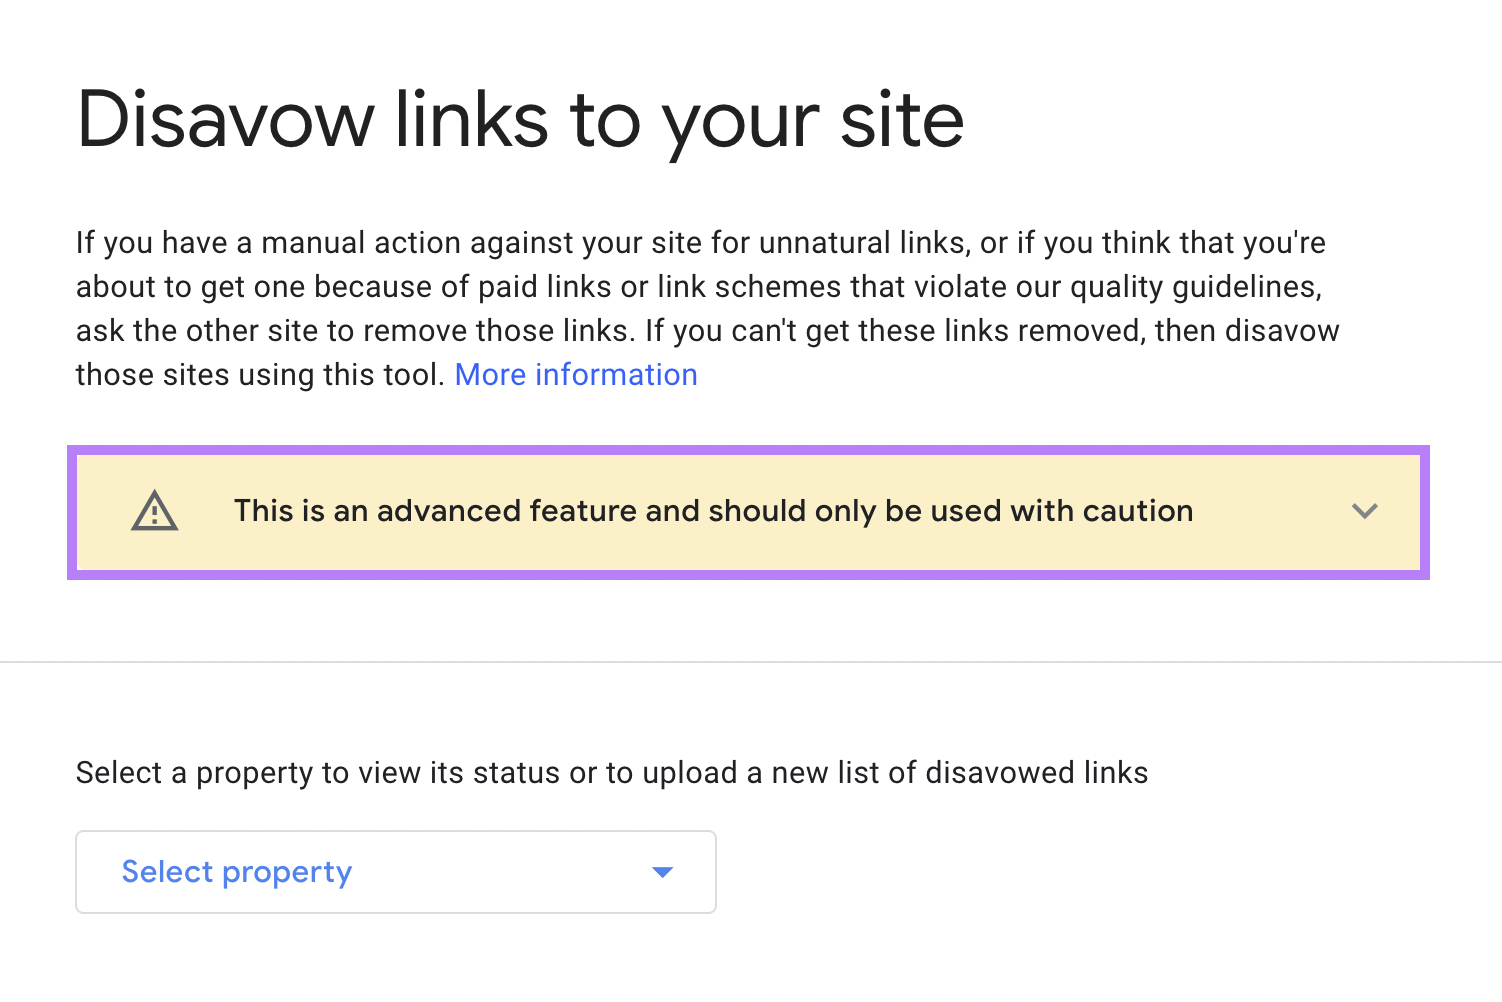 Google's guidance on disavowing links to your site